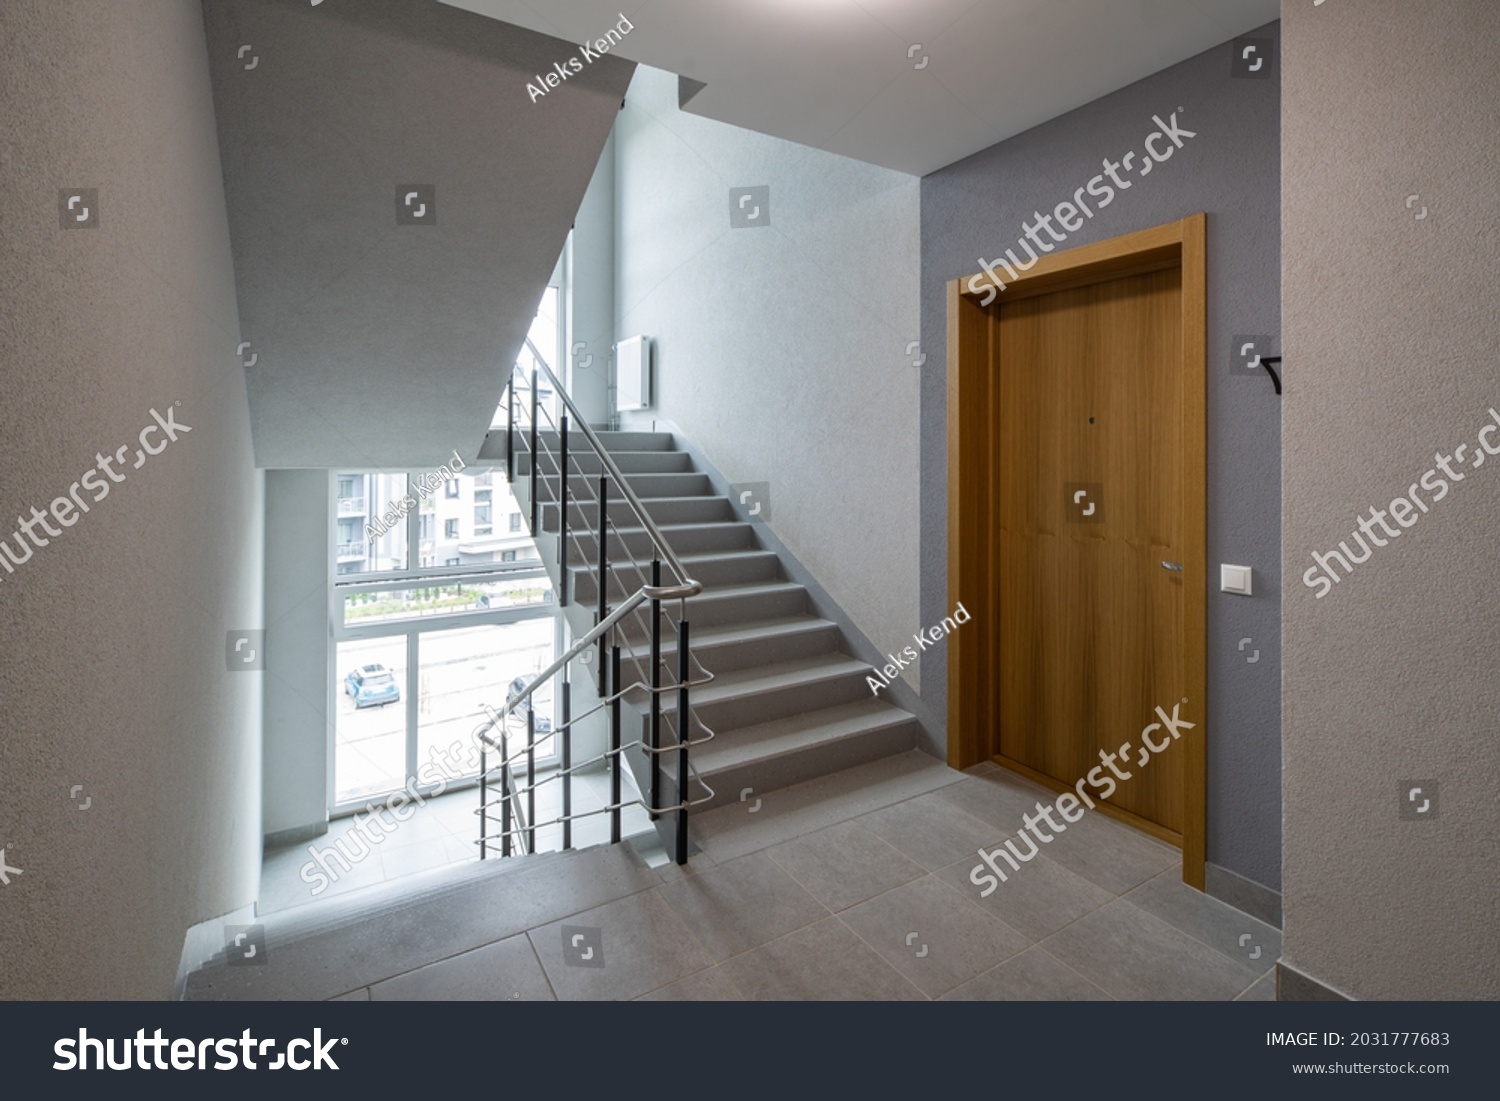 Modern interior of new entrance in residential building. Wooden door to apartment. Stairs and windows. #2031777683